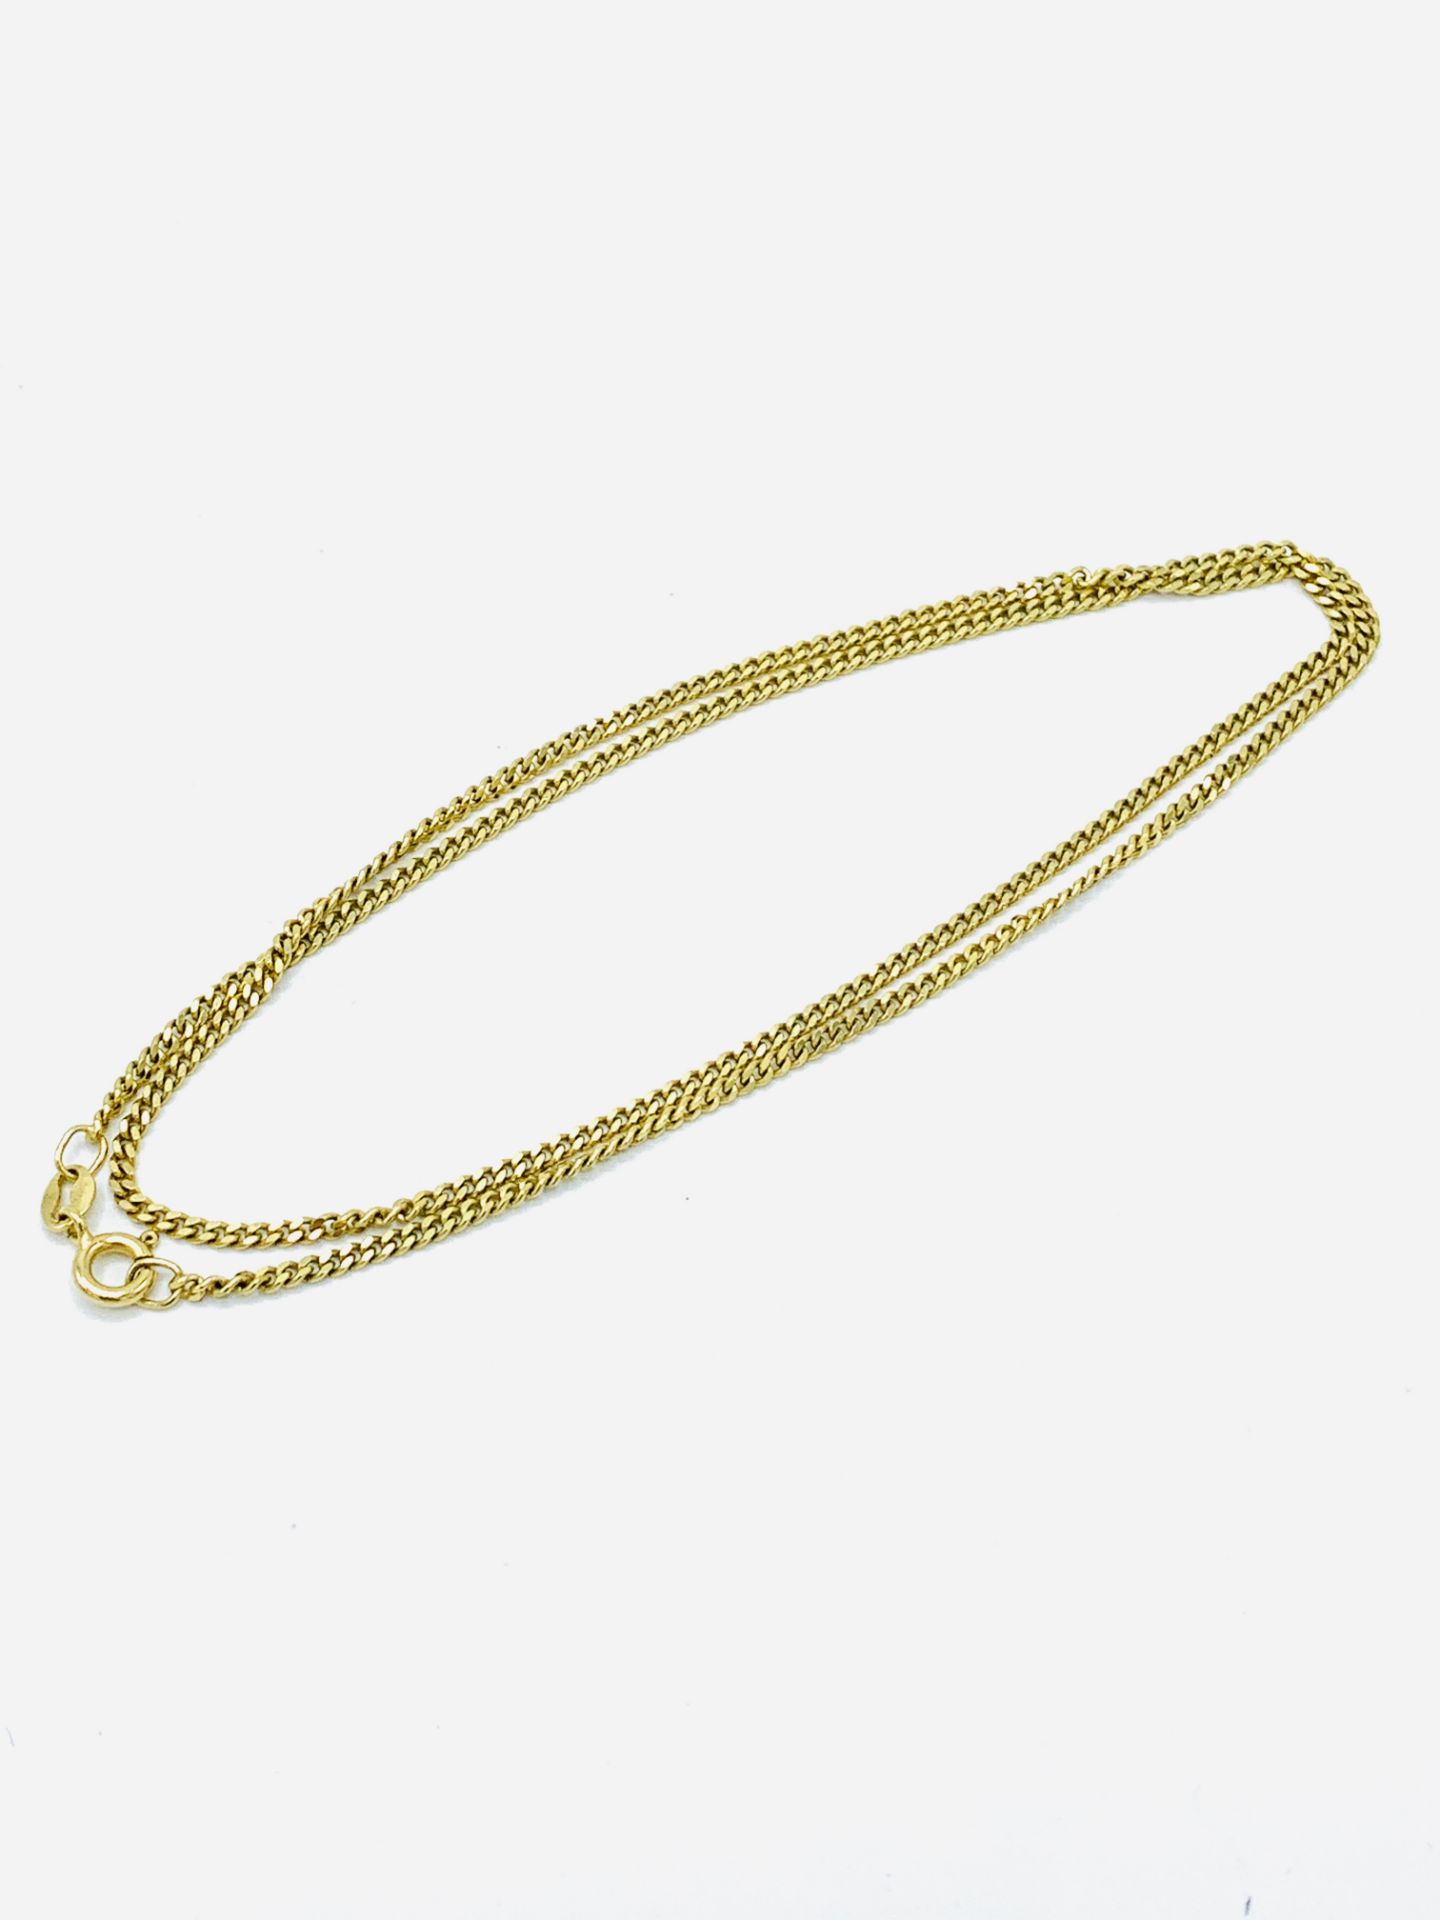 9ct gold flat chain necklace.